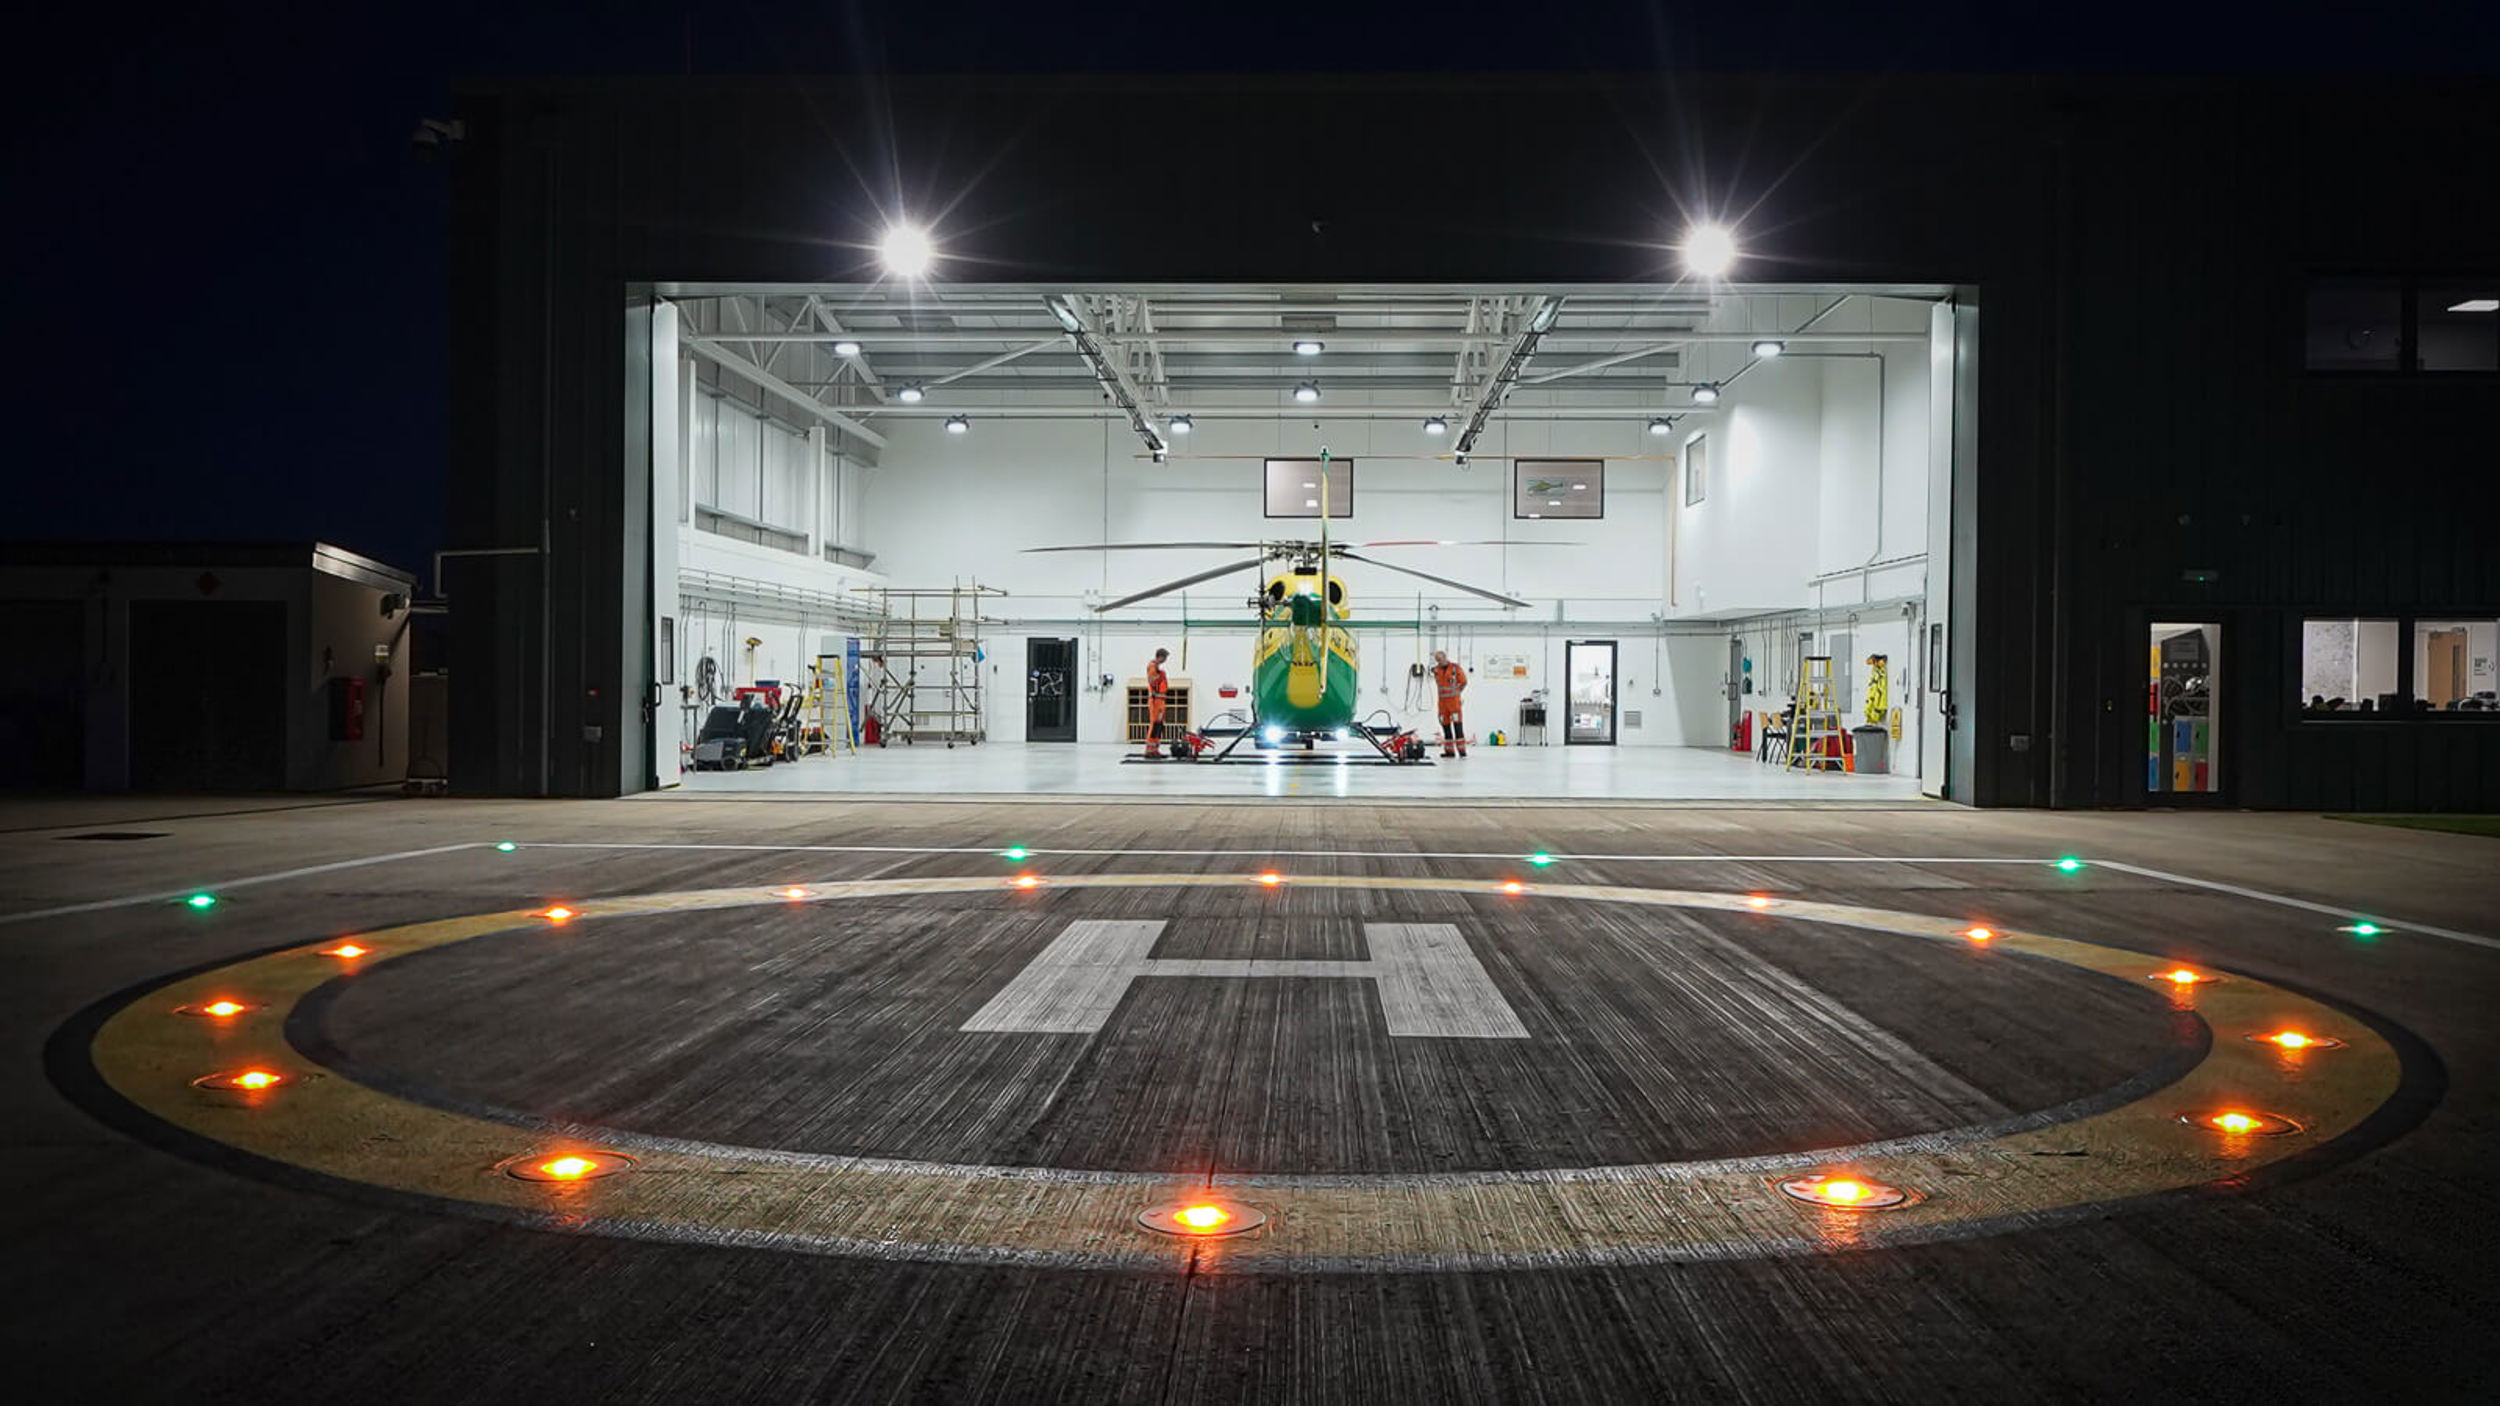 The Wiltshire Air Ambulance helipad at night with yellow and green lights shining against the bright white lights inside the hangar.